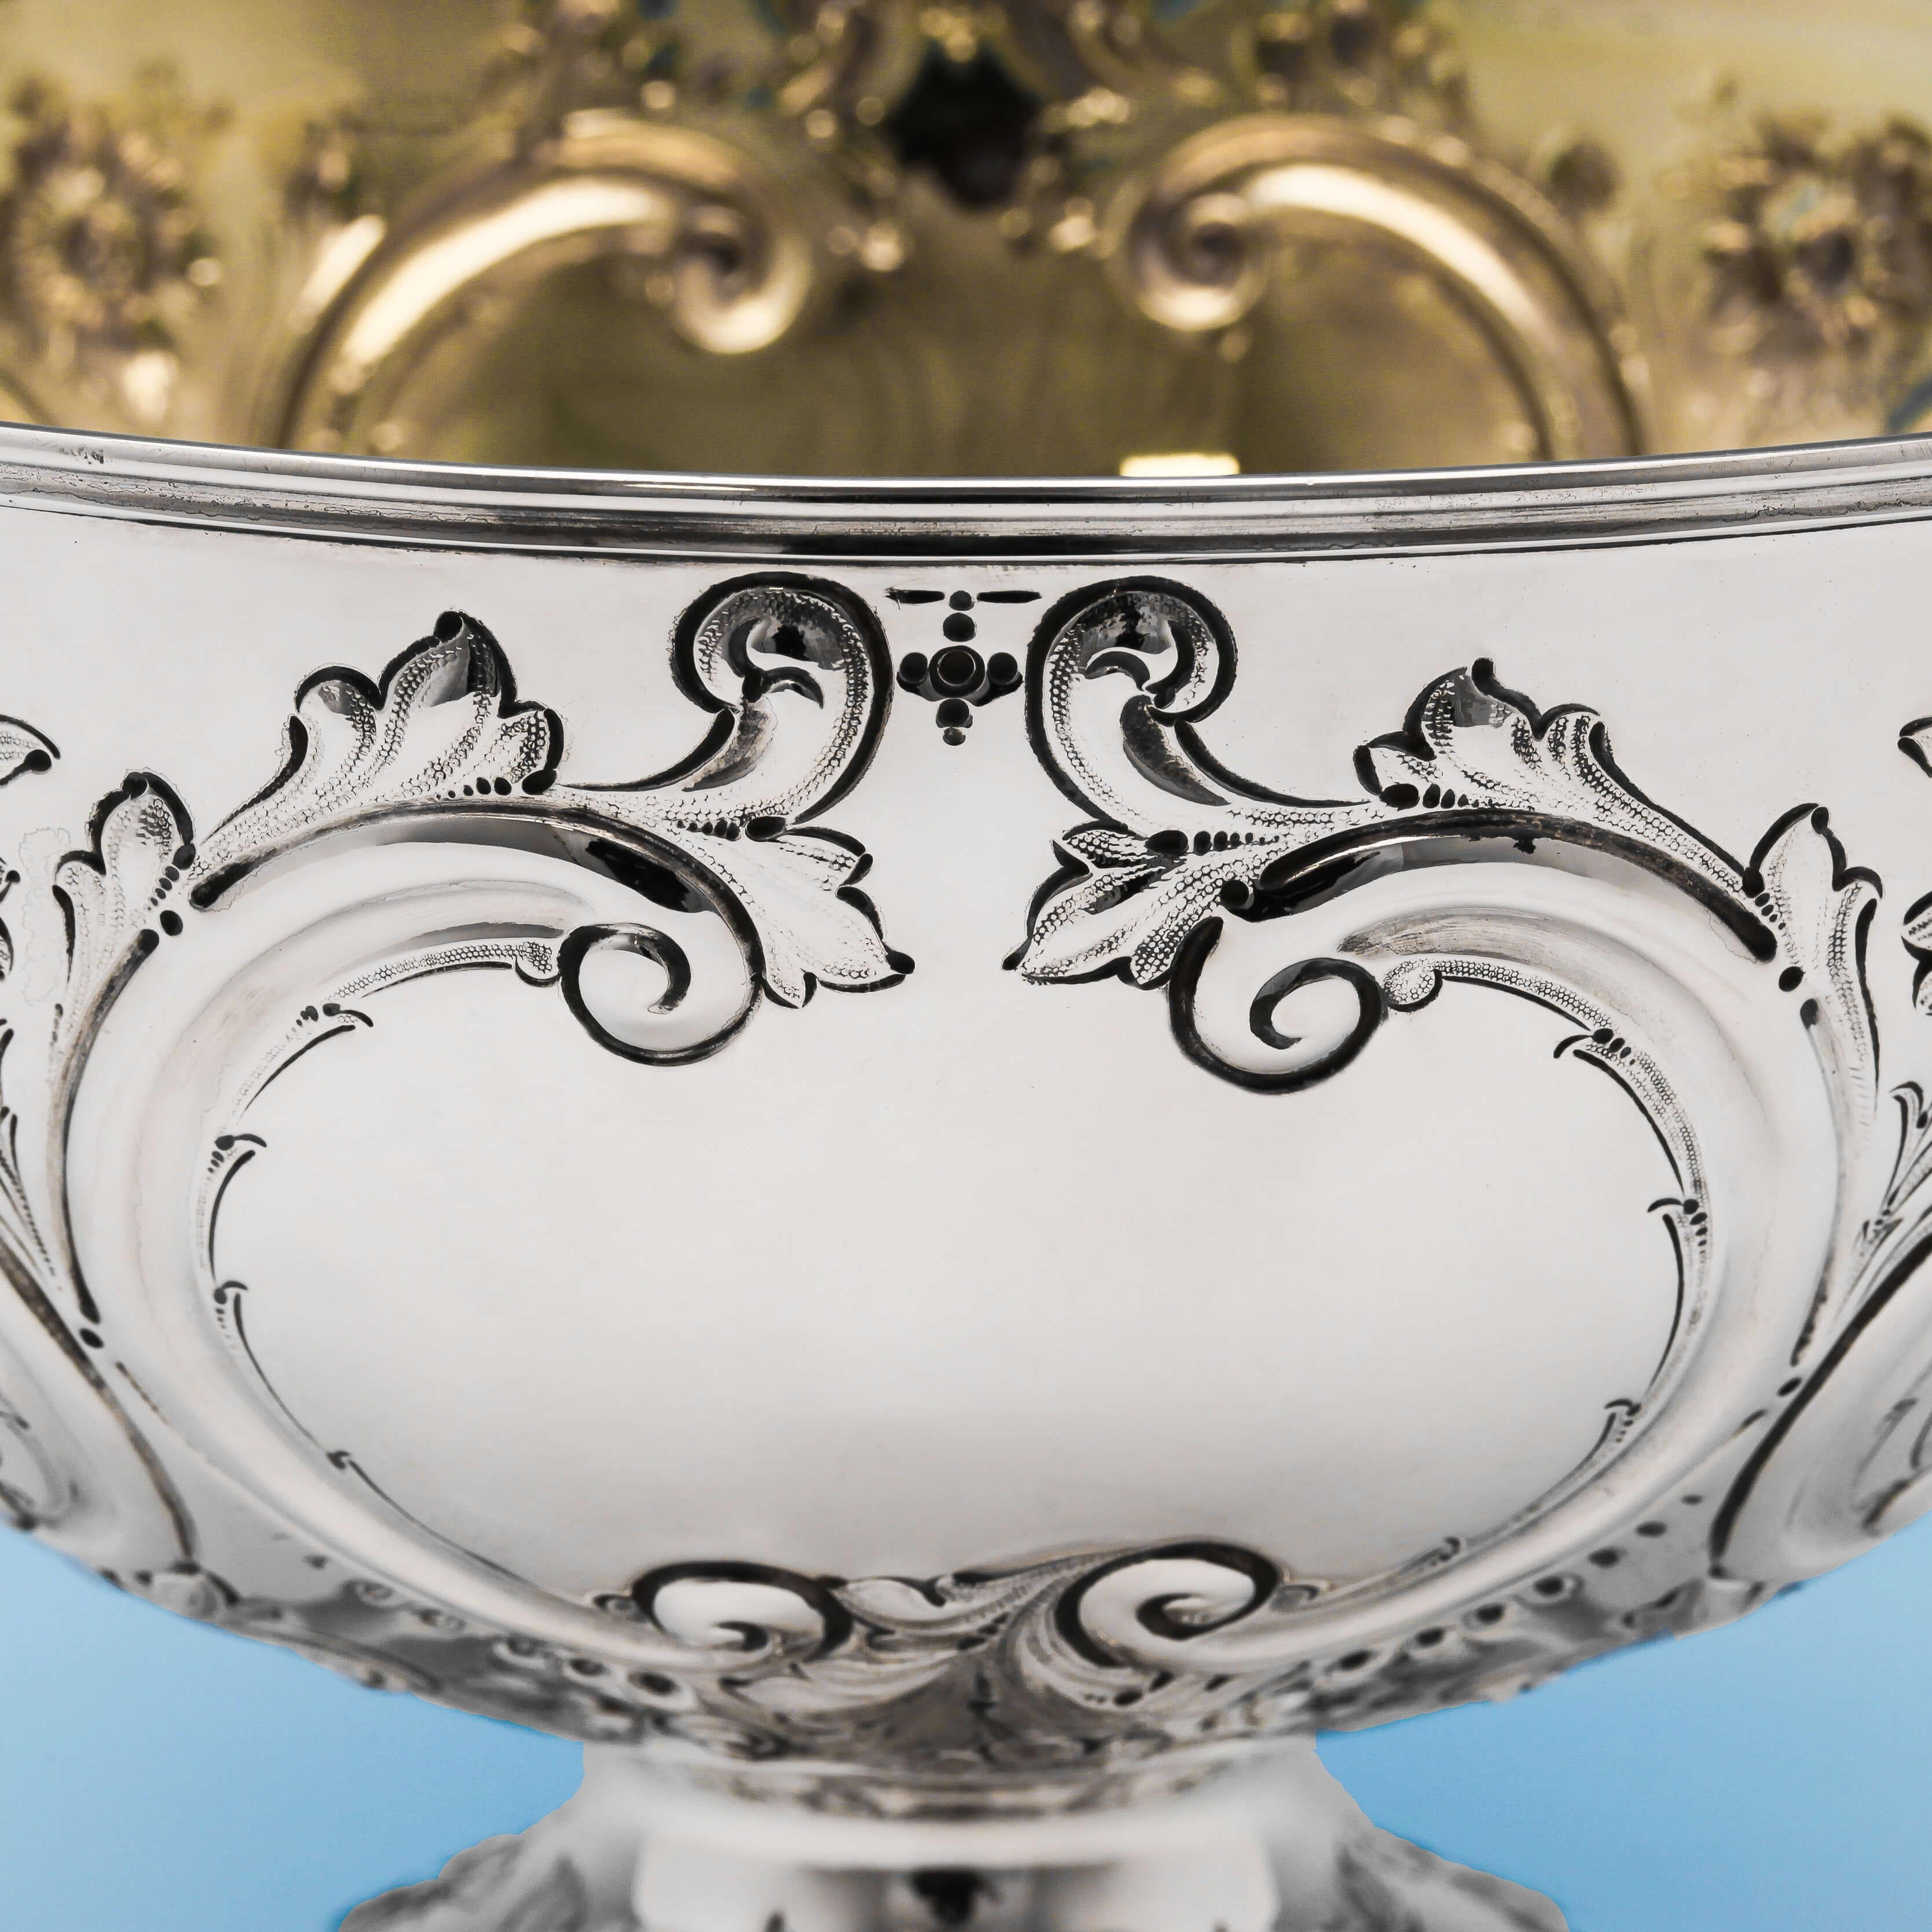 Hallmarked in London, in 1889 by Barnards, this attractive, Victorian, antique sterling silver bowl, features floral and scroll chased decoration throughout, and a gilt interior. The bowl stands on a pedestal foot and measures 7.5 inches (19cm) in